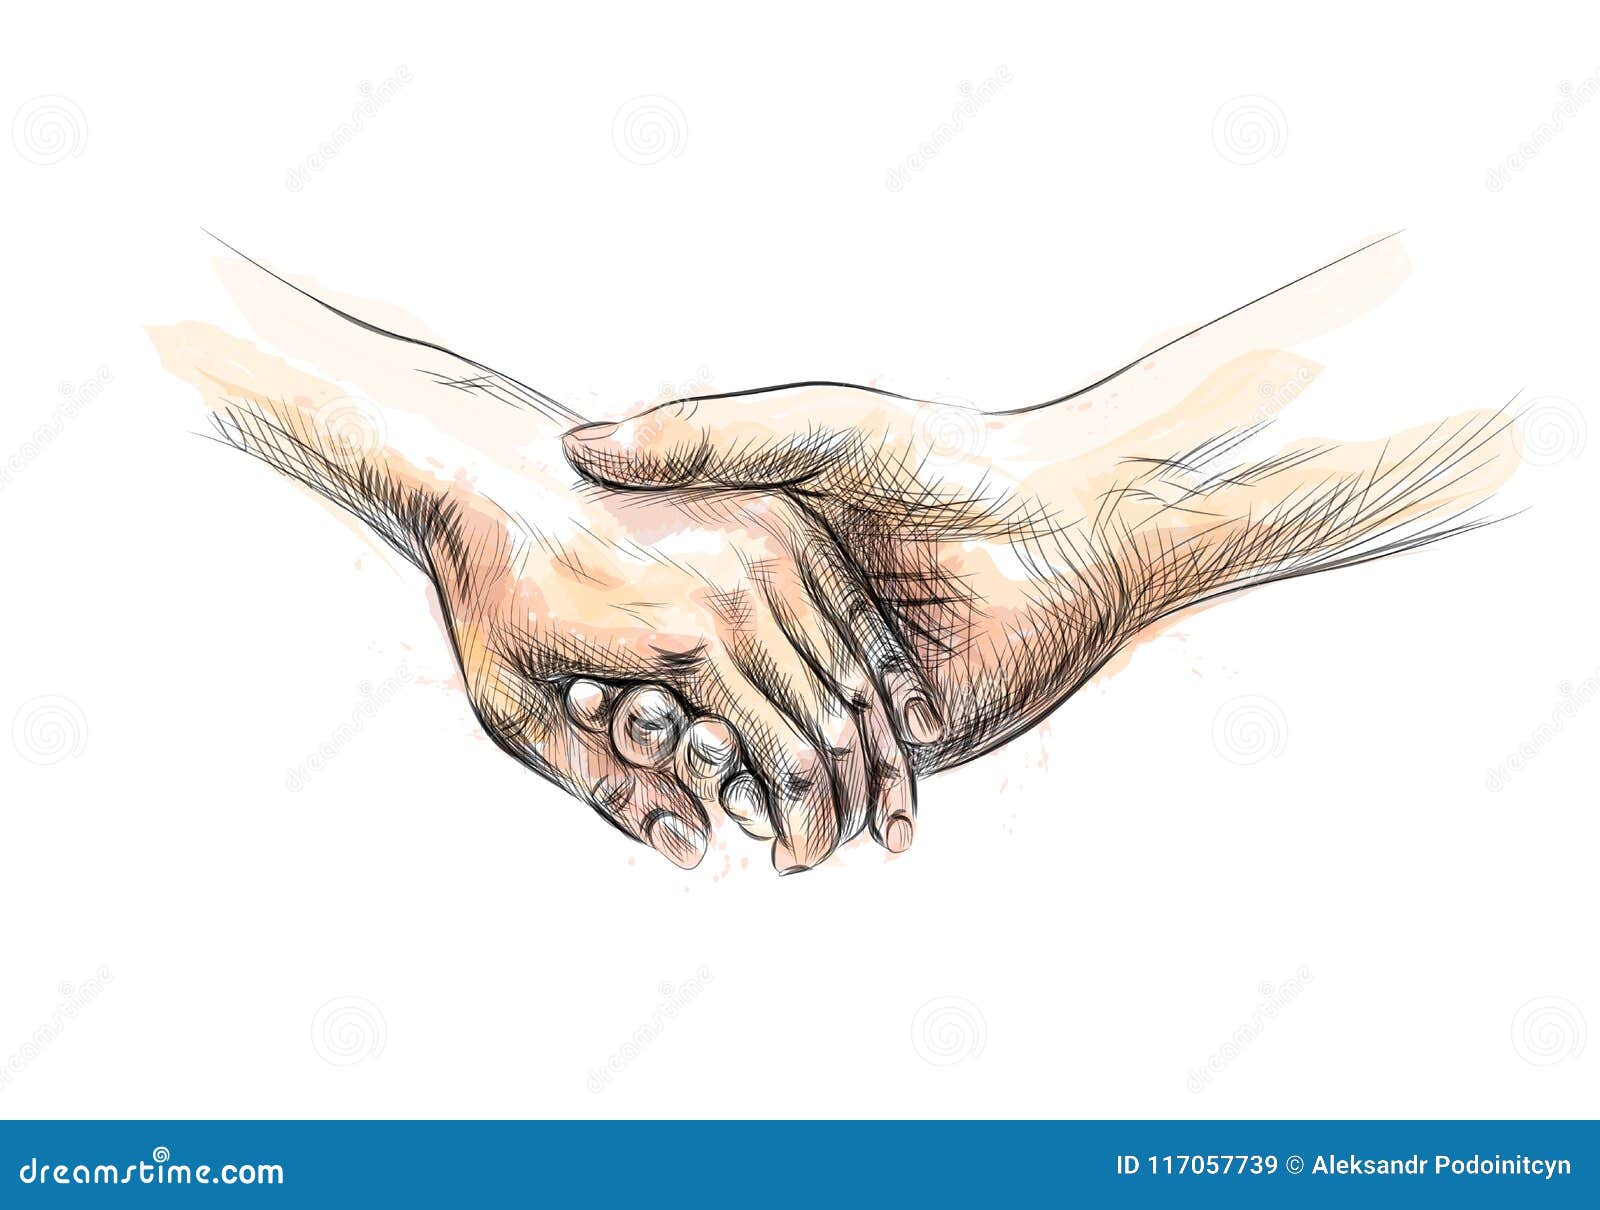 Holding Hands Love Sketch Photos and Images | Shutterstock